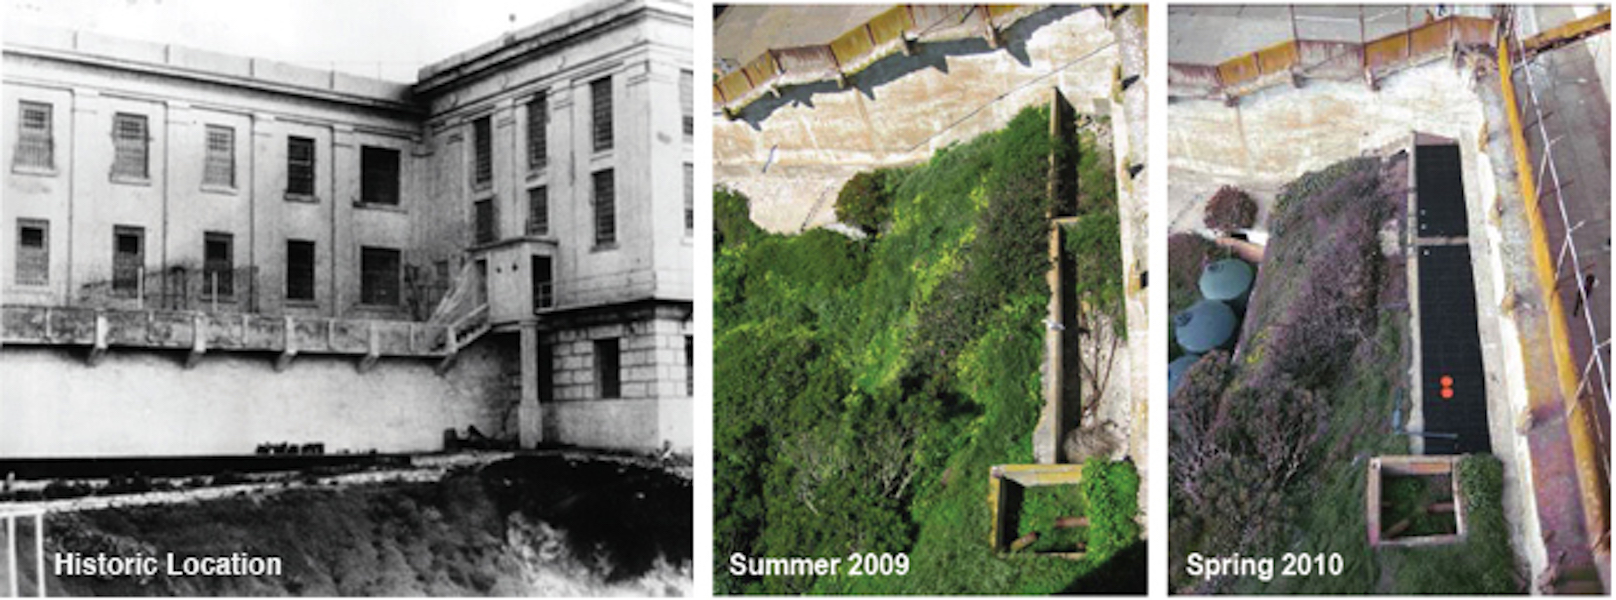 Historic and modern photo comparisons of the Alcatraz Historic Gardens rainwater catchment system